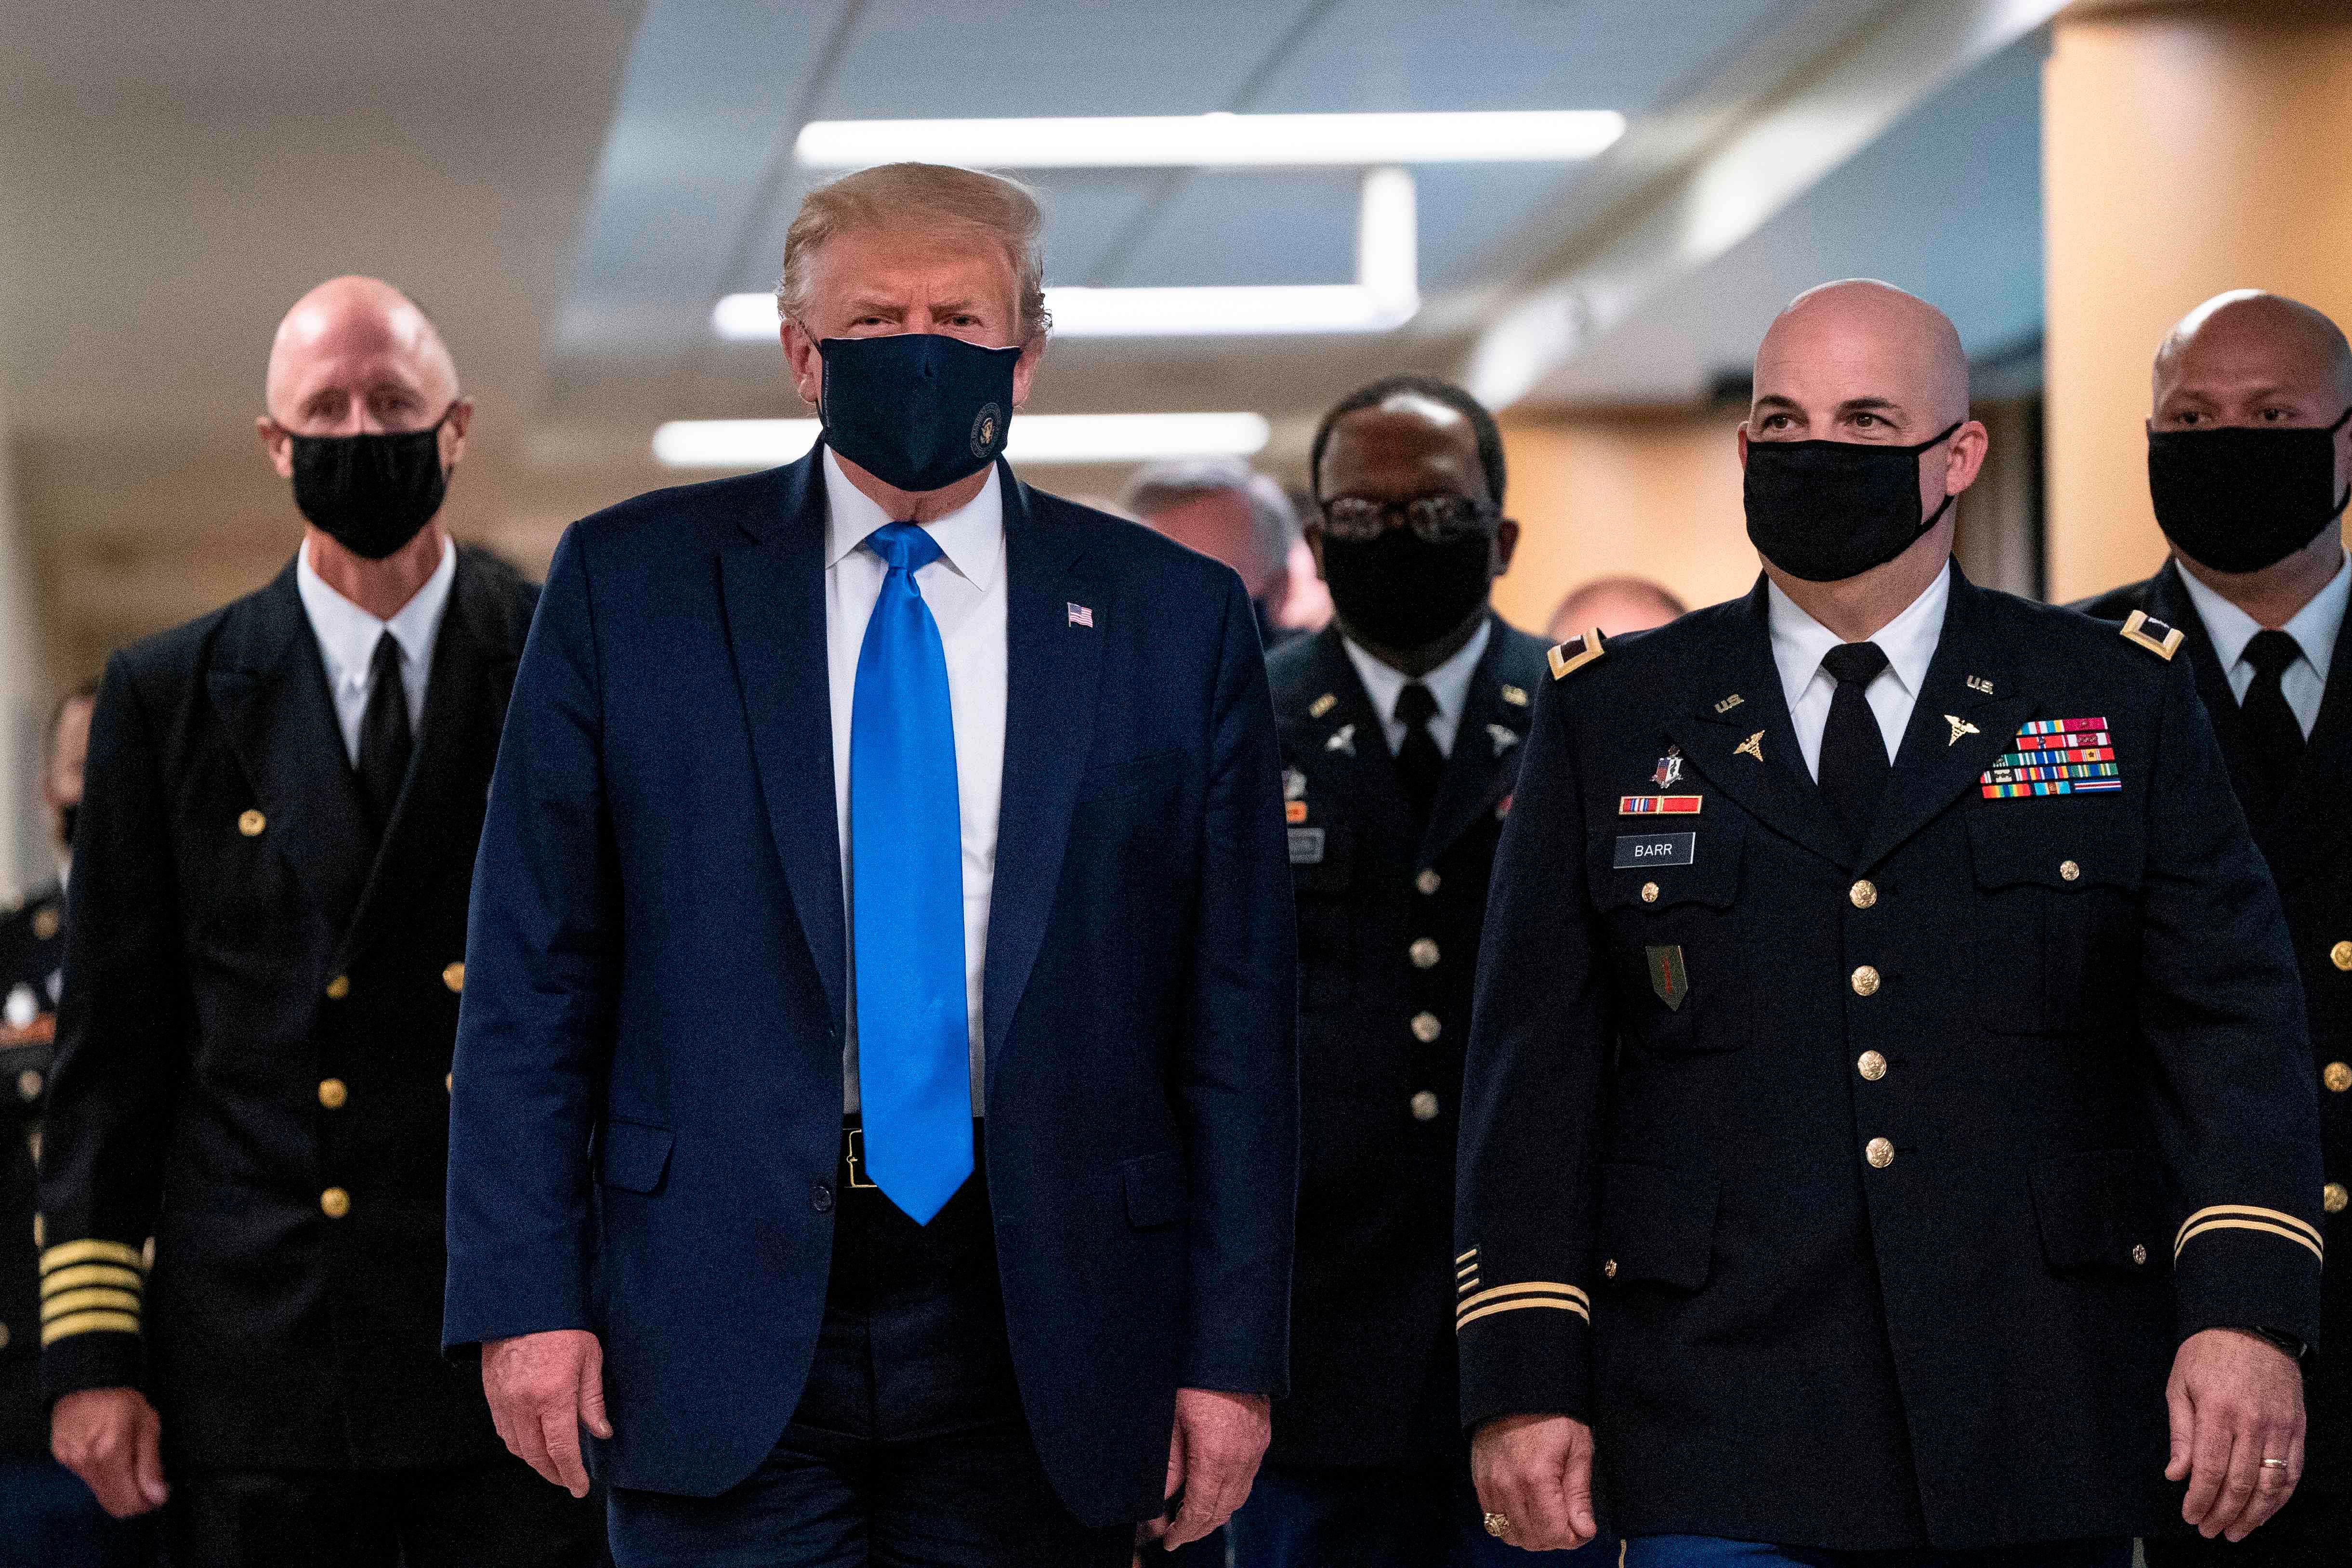  US President Donald Trump wears a mask as he visits Walter Reed National Military Medical Center in Bethesda, Maryland' on July 11, 2020. Credit: AFP